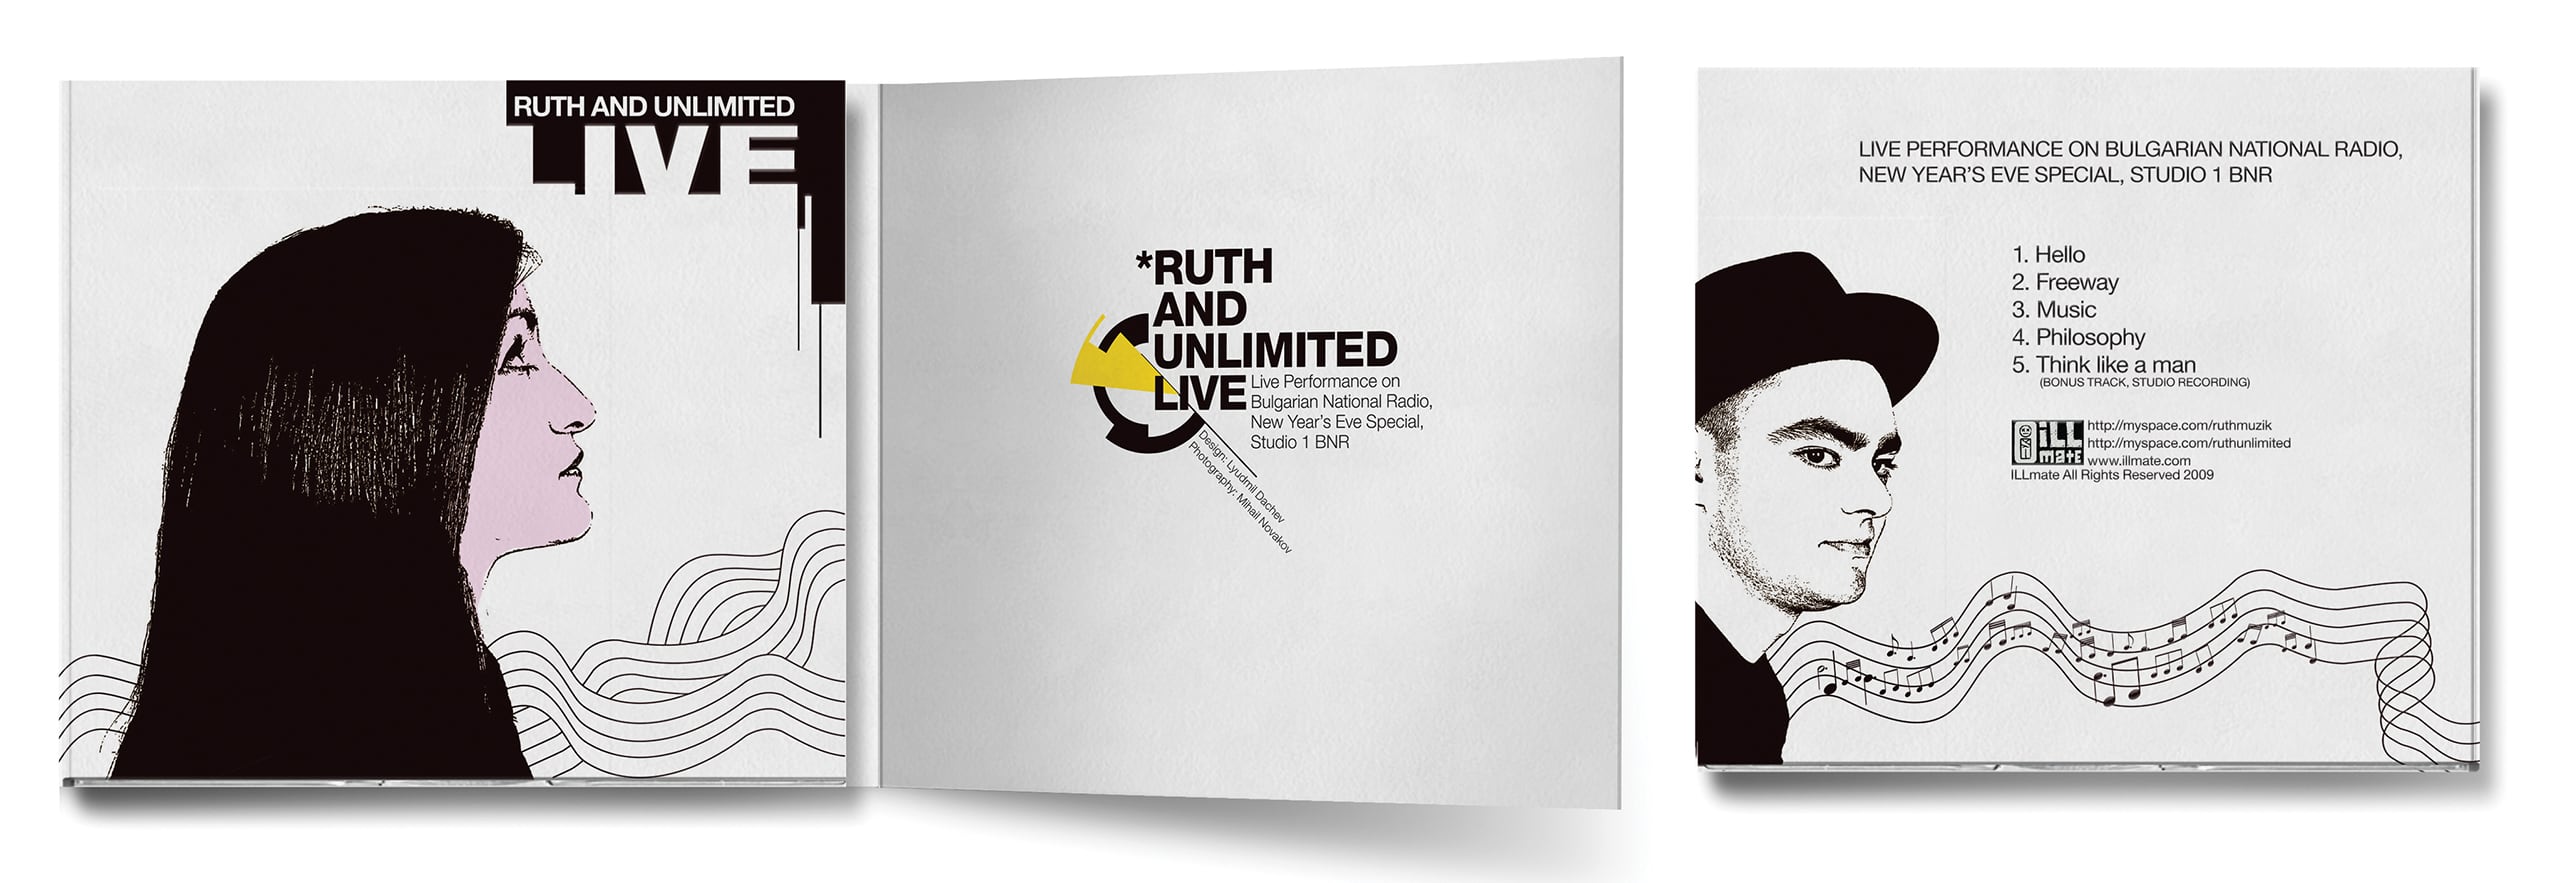 Ruth and Unlimited Album Artwork